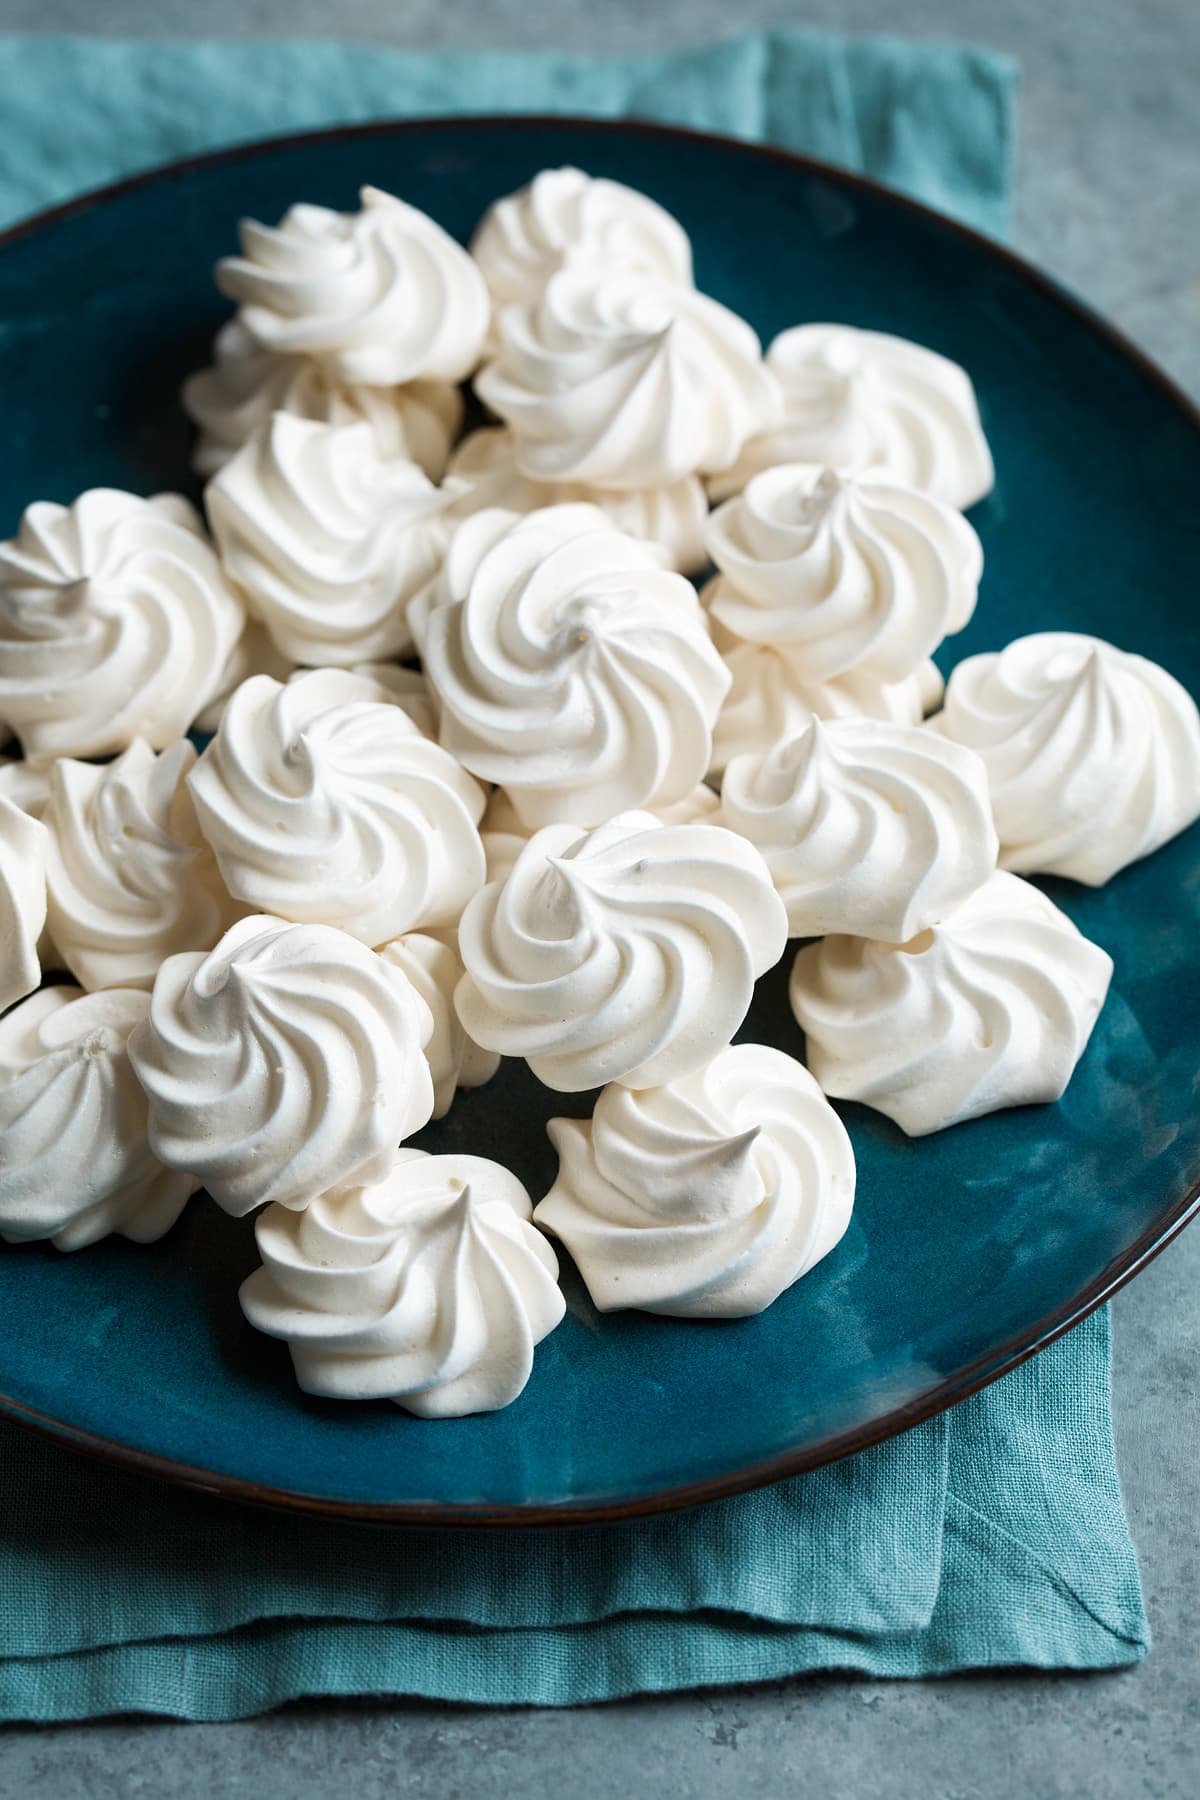 Round and swirly white meringue cookies on a large blue plate.